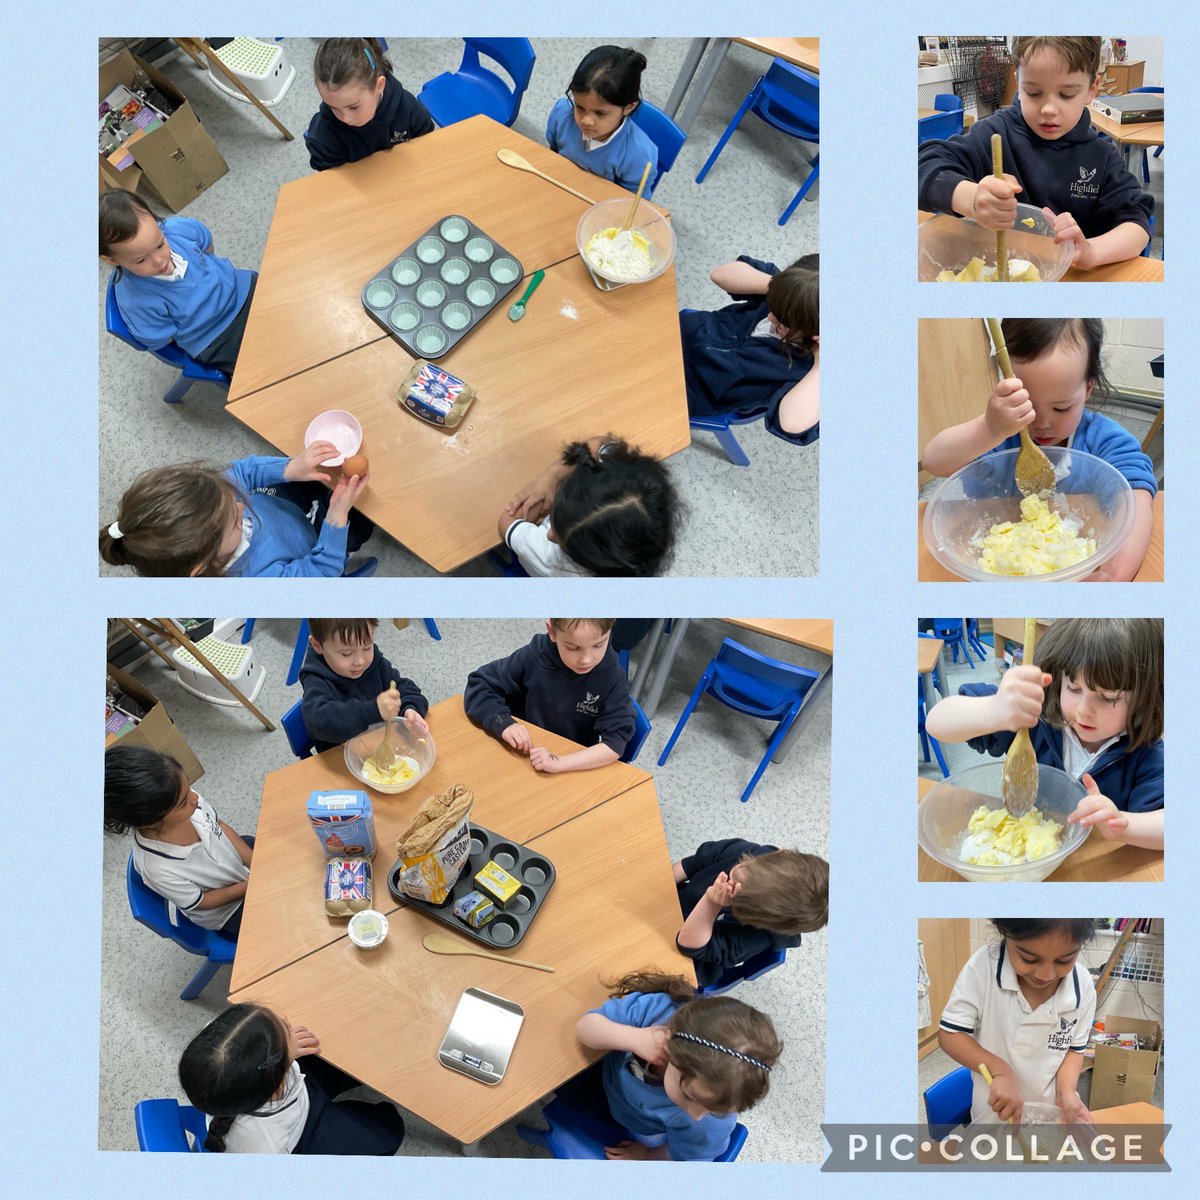 '🍰🎉Wrapping up our activity week with a bang! Our EYFS kiddos whipped up some delicious treats today – cakes galore! From measuring ingredients to cracking eggs, we did it all. Talk about a sensory adventure! Here's to a sweet ending to a wonderful day! #EYFS #BakingFun